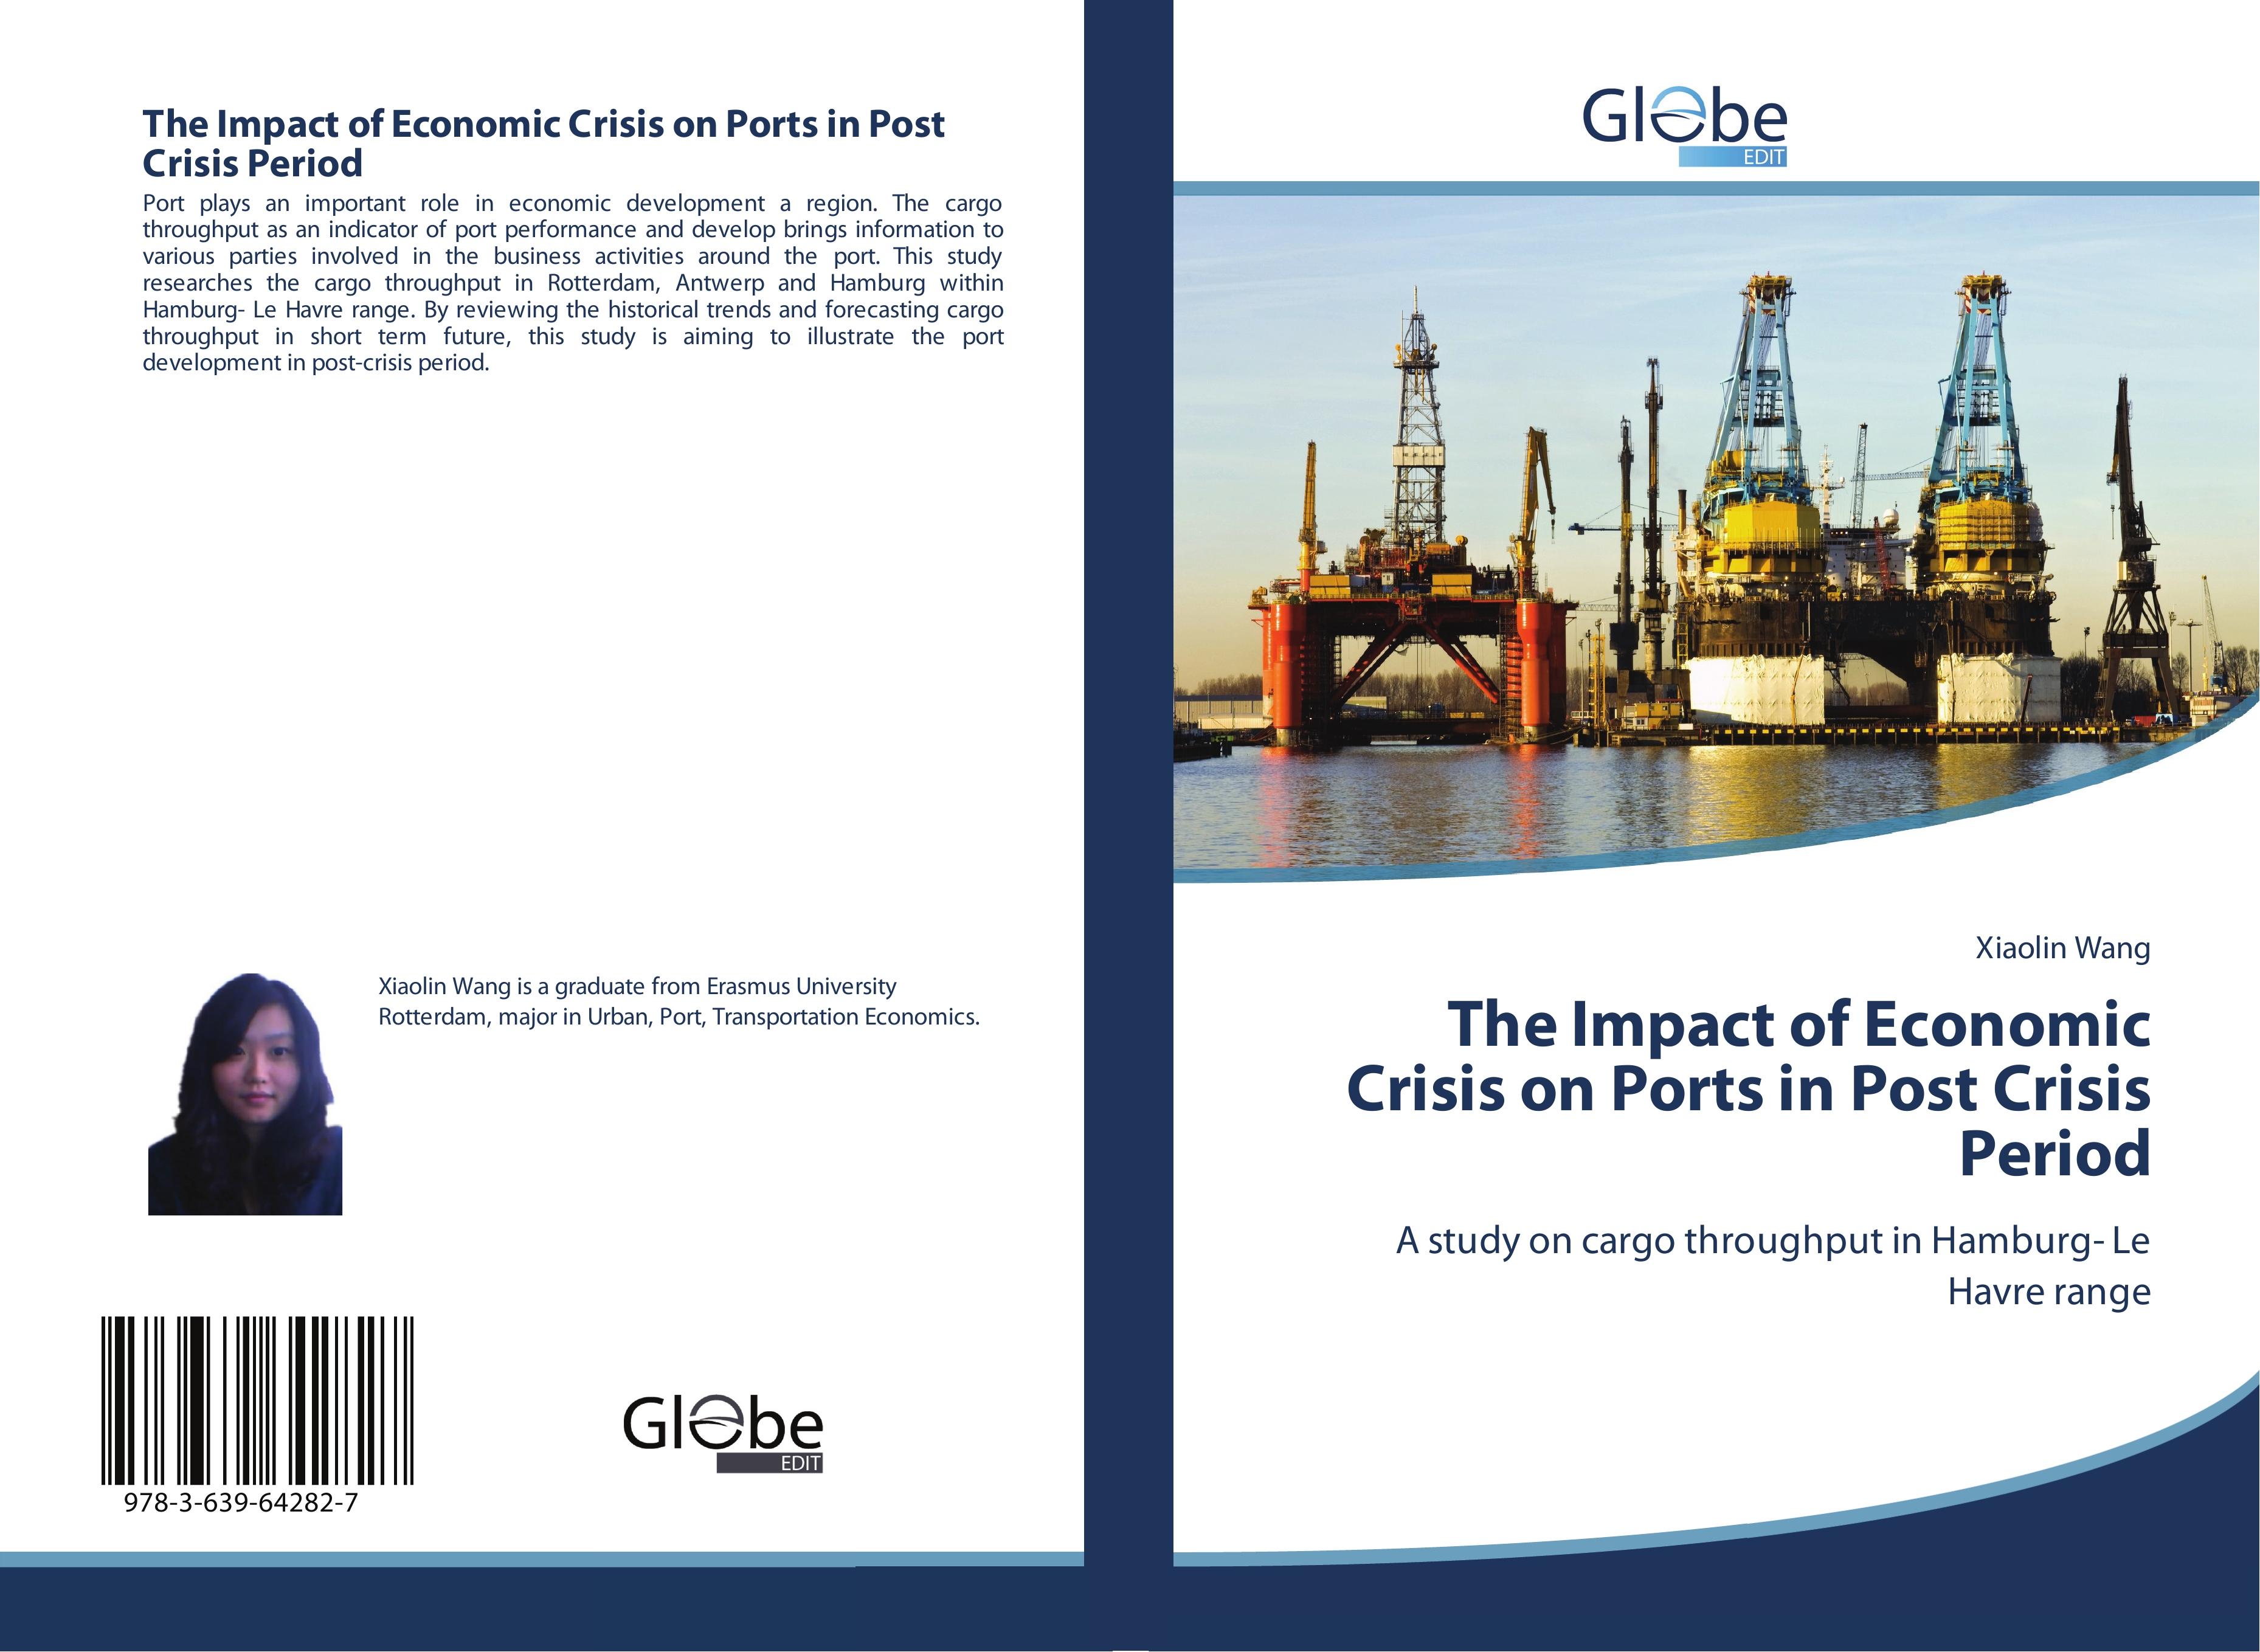 The Impact of Economic Crisis on Ports in Post Crisis Period - Xiaolin Wang